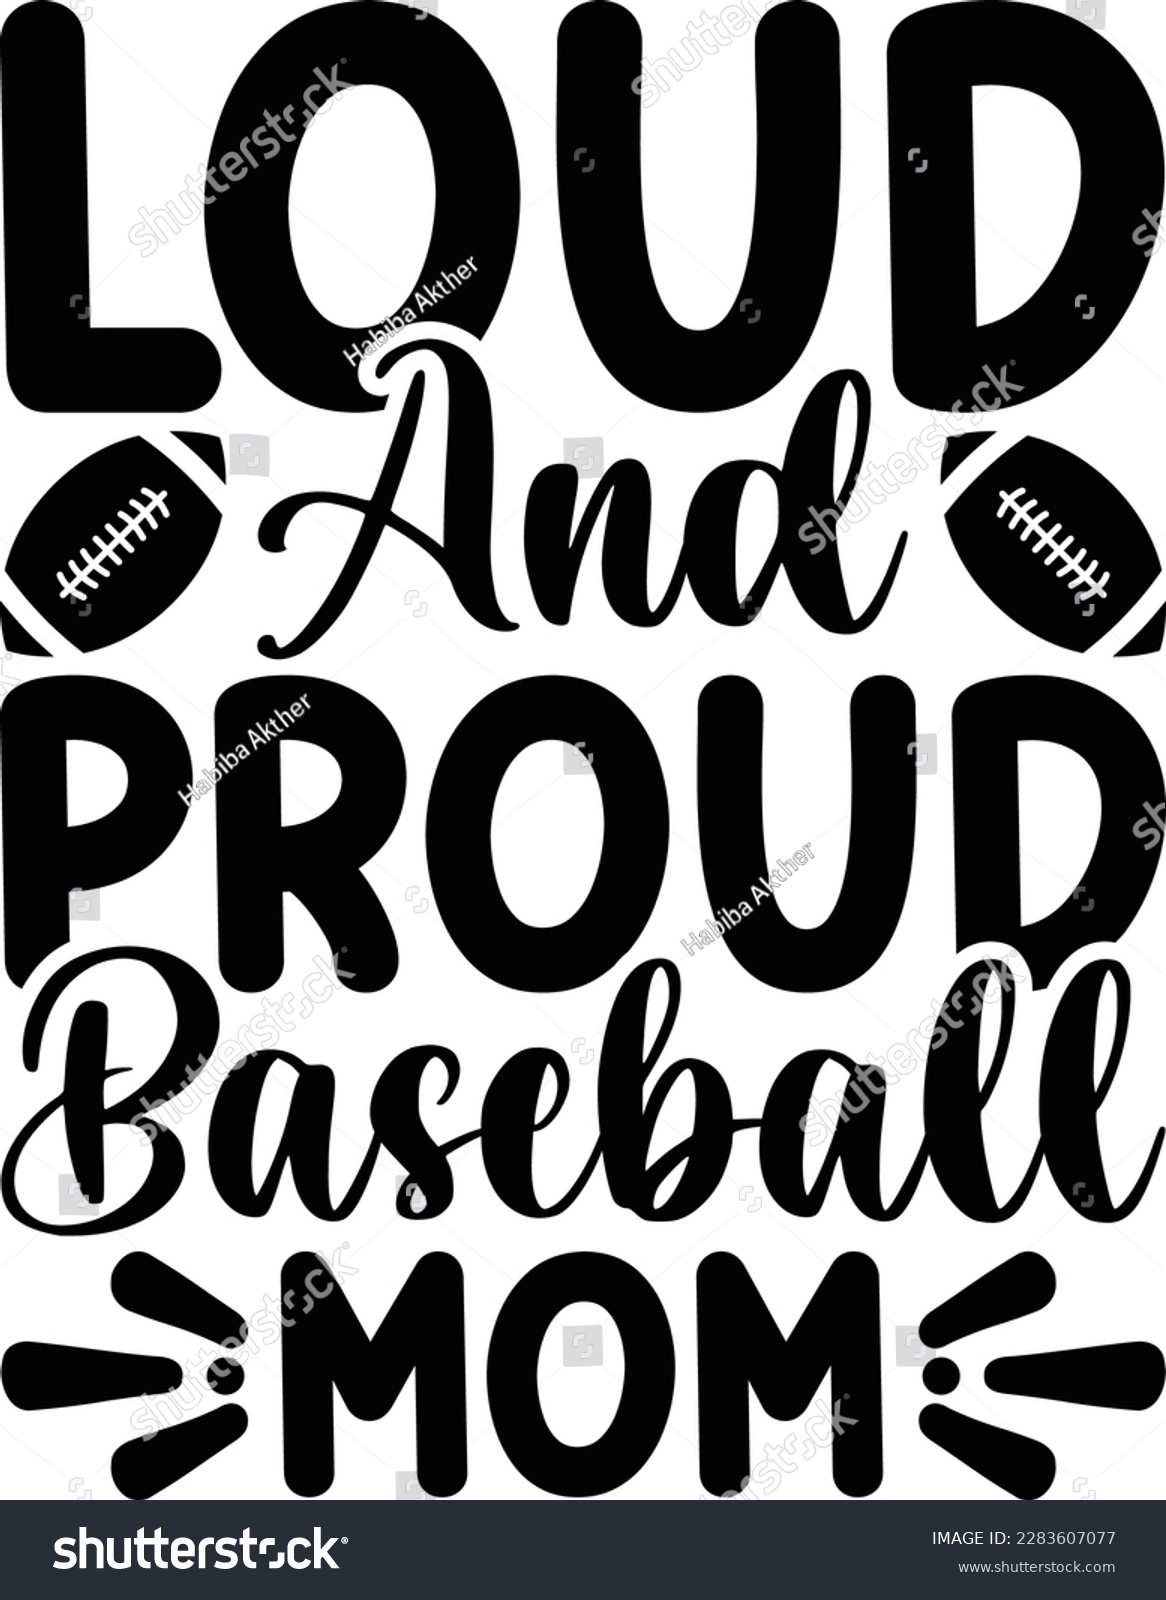 SVG of Baseball y'all svg ,Sports ,Mom Life ,Supportive Mom ,Silhouette, Team, Baseball Template 0027 svg ,eps, Softball , Game day , T-Shirt,  Baseball Stitches ,Vector ,Baseball Threads,cutter,Mascot svg, svg